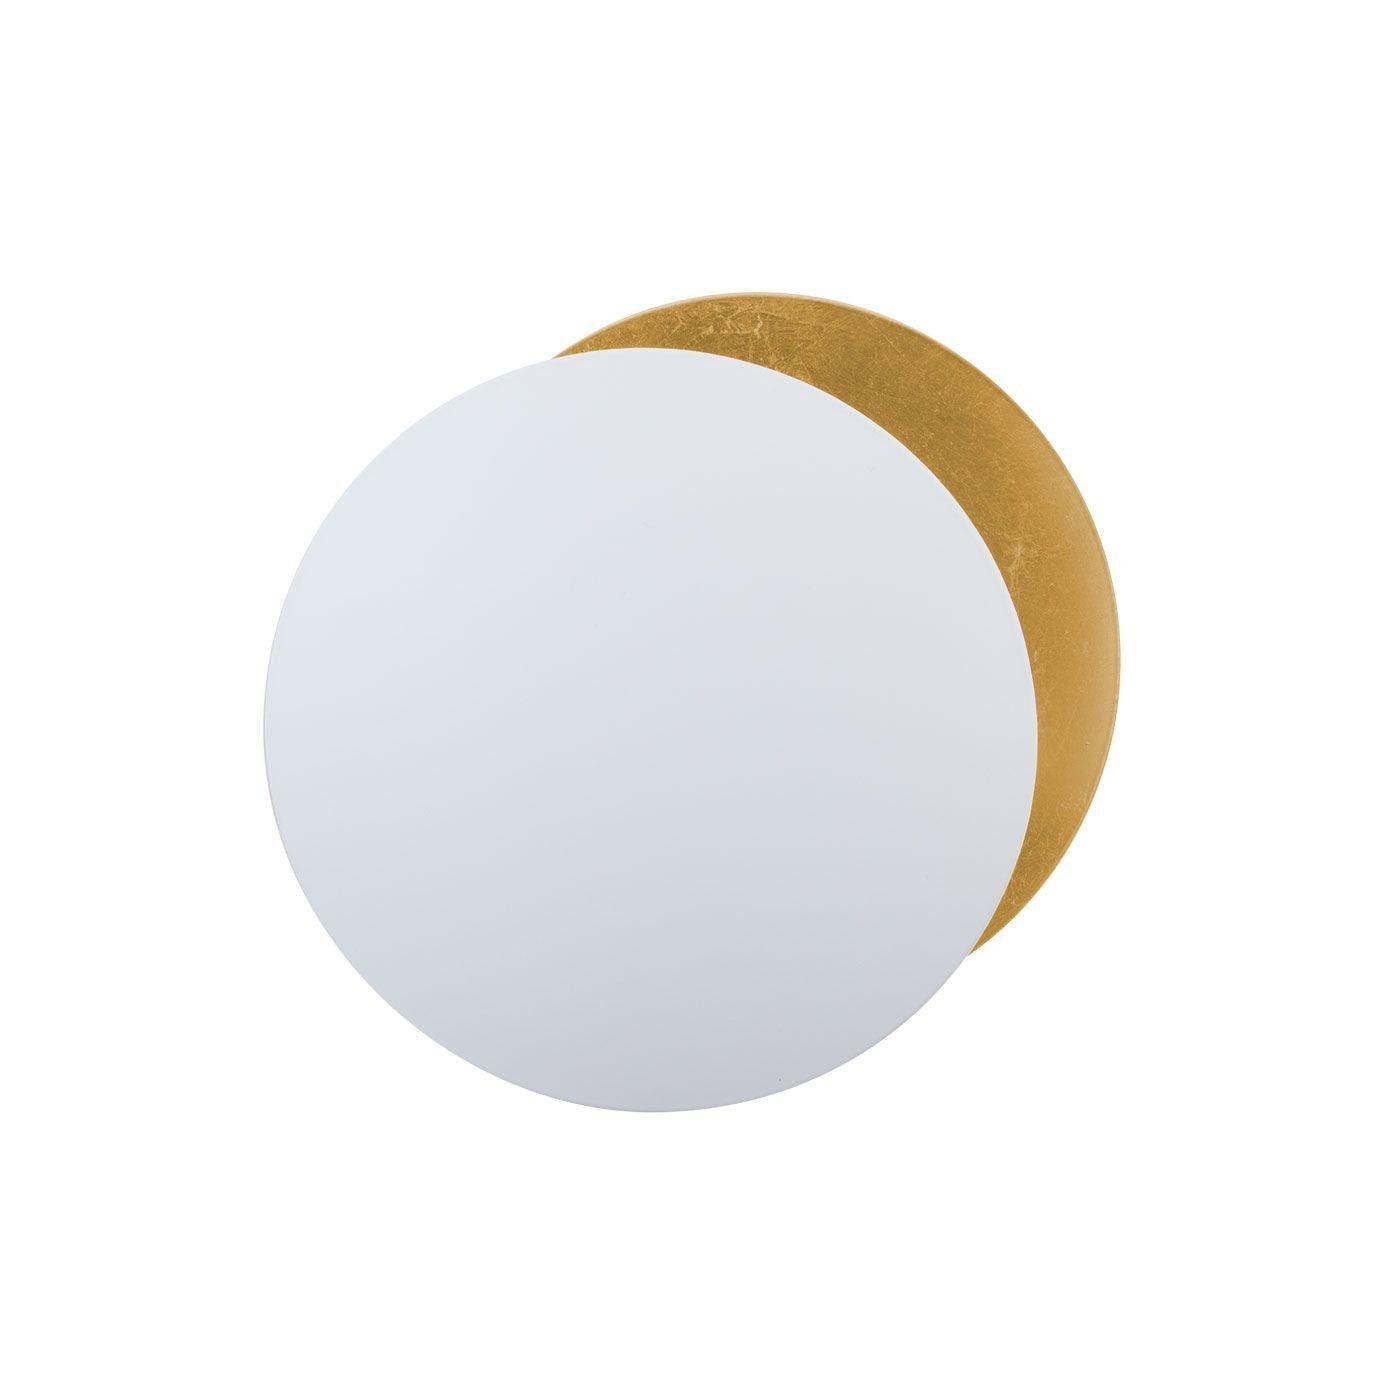 Lederam Wall Lamp in White and Gold, 25cm Diameter x 25cm Height, Cool White (Set of 2 Lamps)